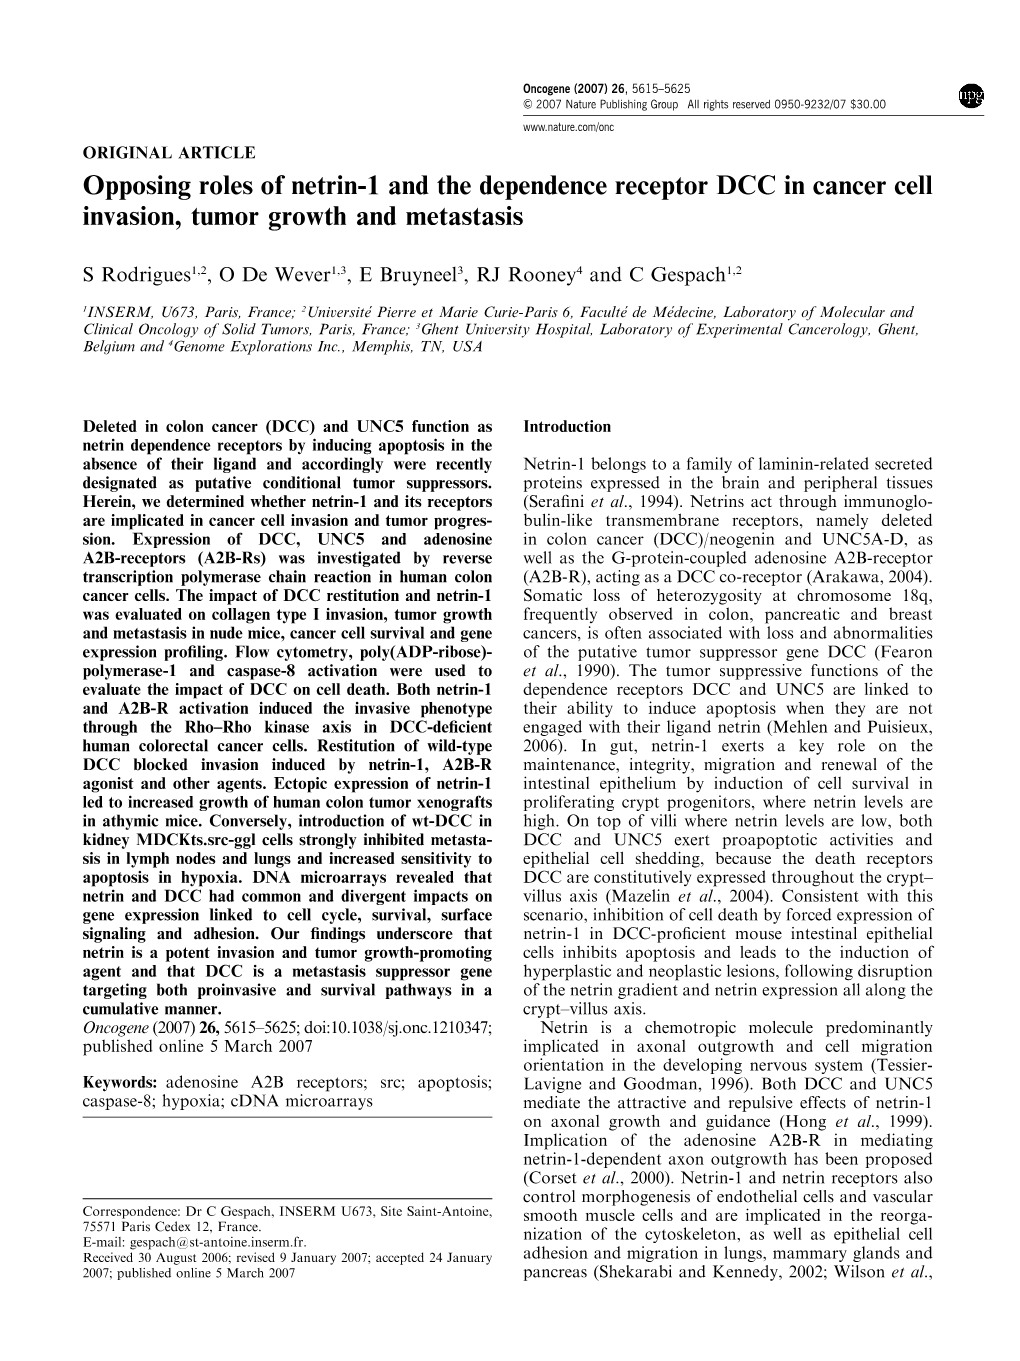 Opposing Roles of Netrin-1 and the Dependence Receptor DCC in Cancer Cell Invasion, Tumor Growth and Metastasis